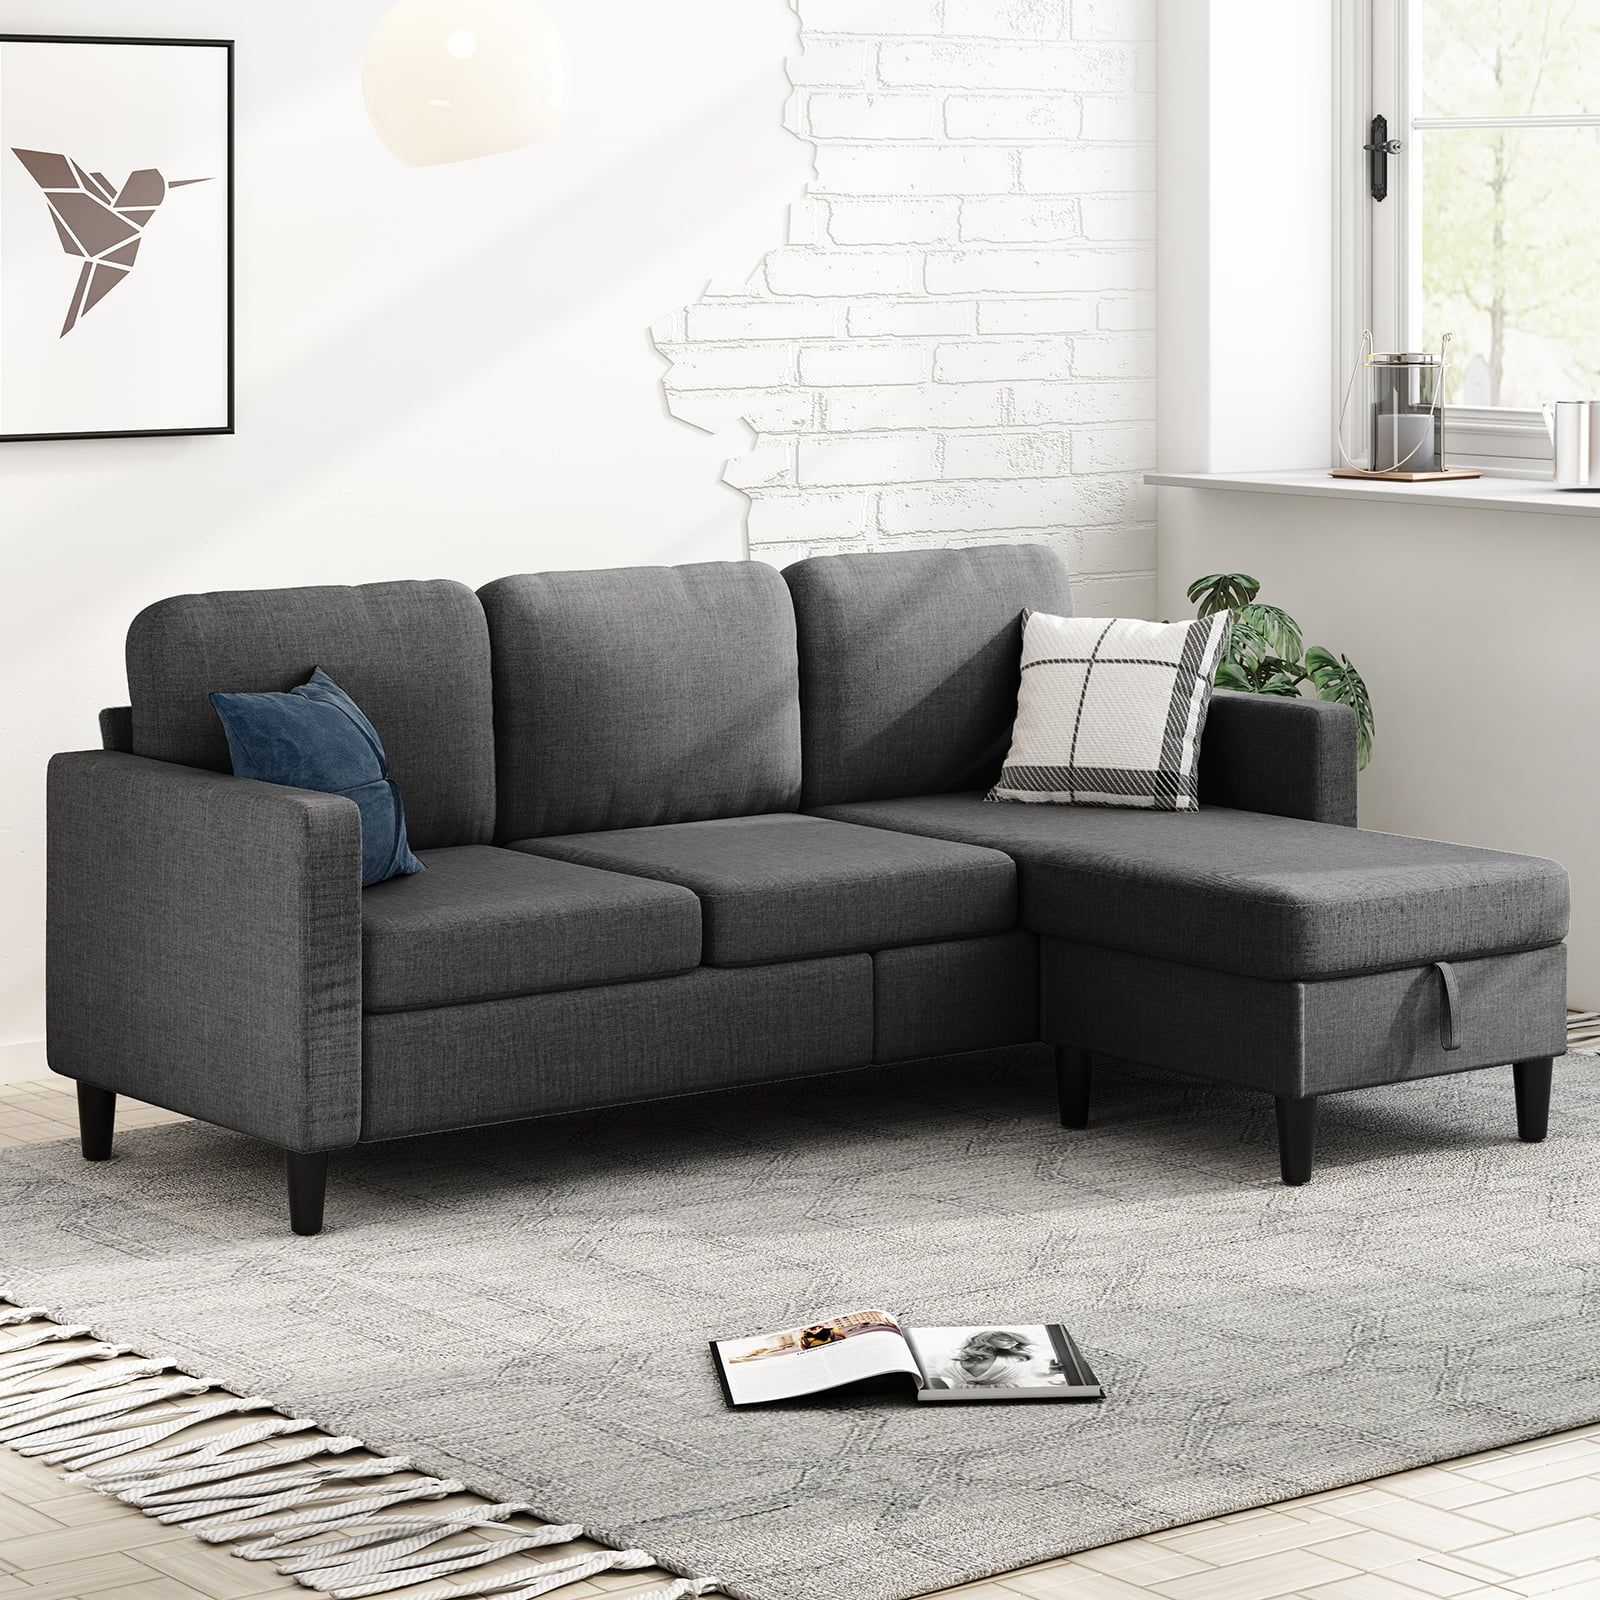 Muzz Sectional Sofa With Movable Ottoman, Free Combination Sectional Couch,  Small L Shaped Sectional Sofa With Storage Ottoman, Modern Linen Fabric  Sofa Set For Living Room (Dark Grey) – Walmart Pertaining To Modern Linen Fabric Sofa Sets (View 2 of 15)